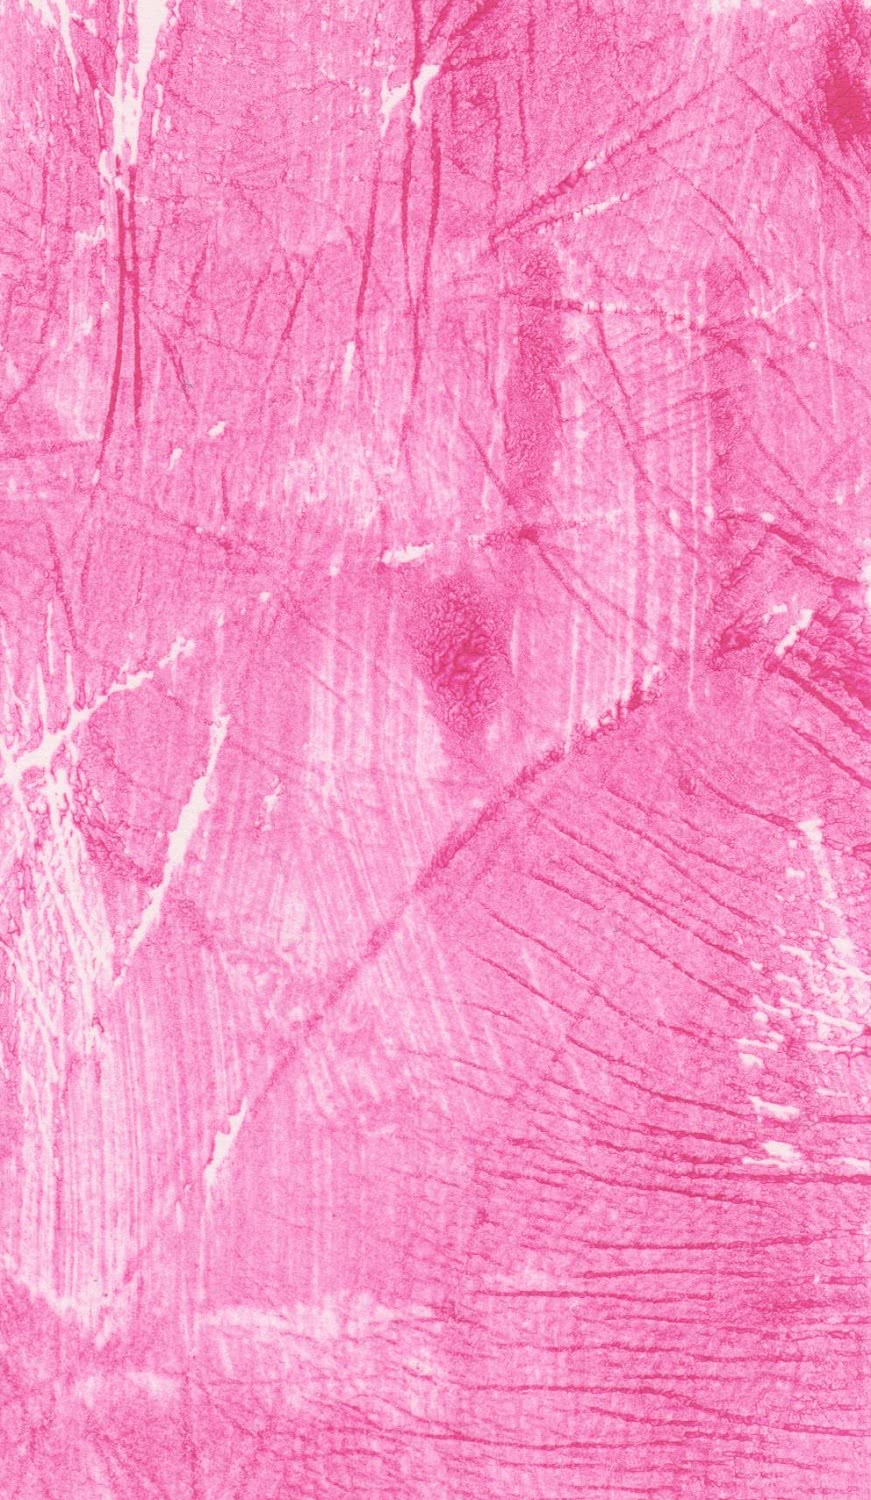 Part of a hand print close up, Pink